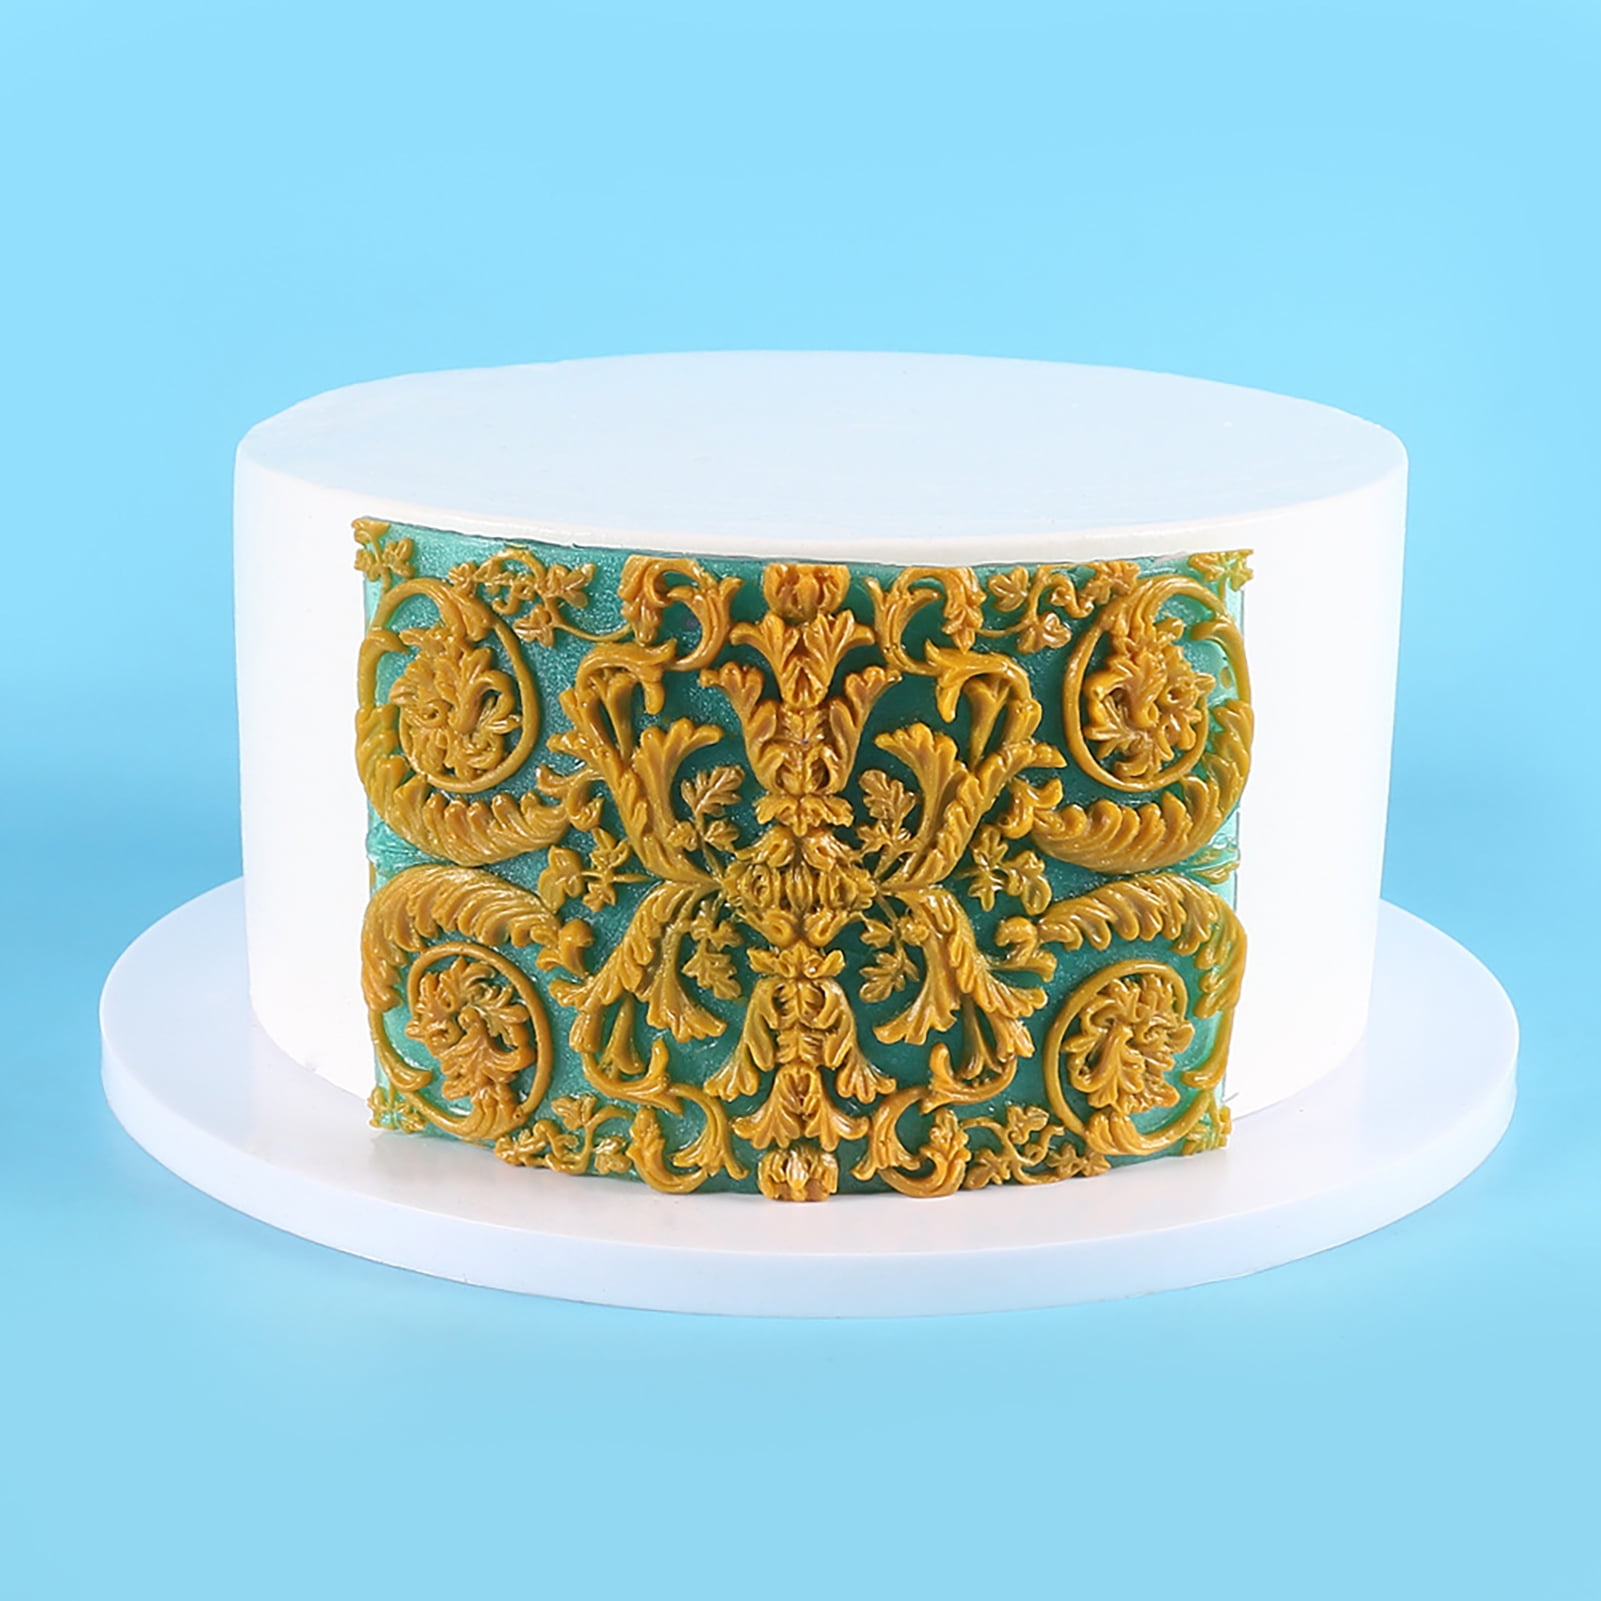 Mandy Lace Silicone Mold for Cake Decorating and DIY Crafts